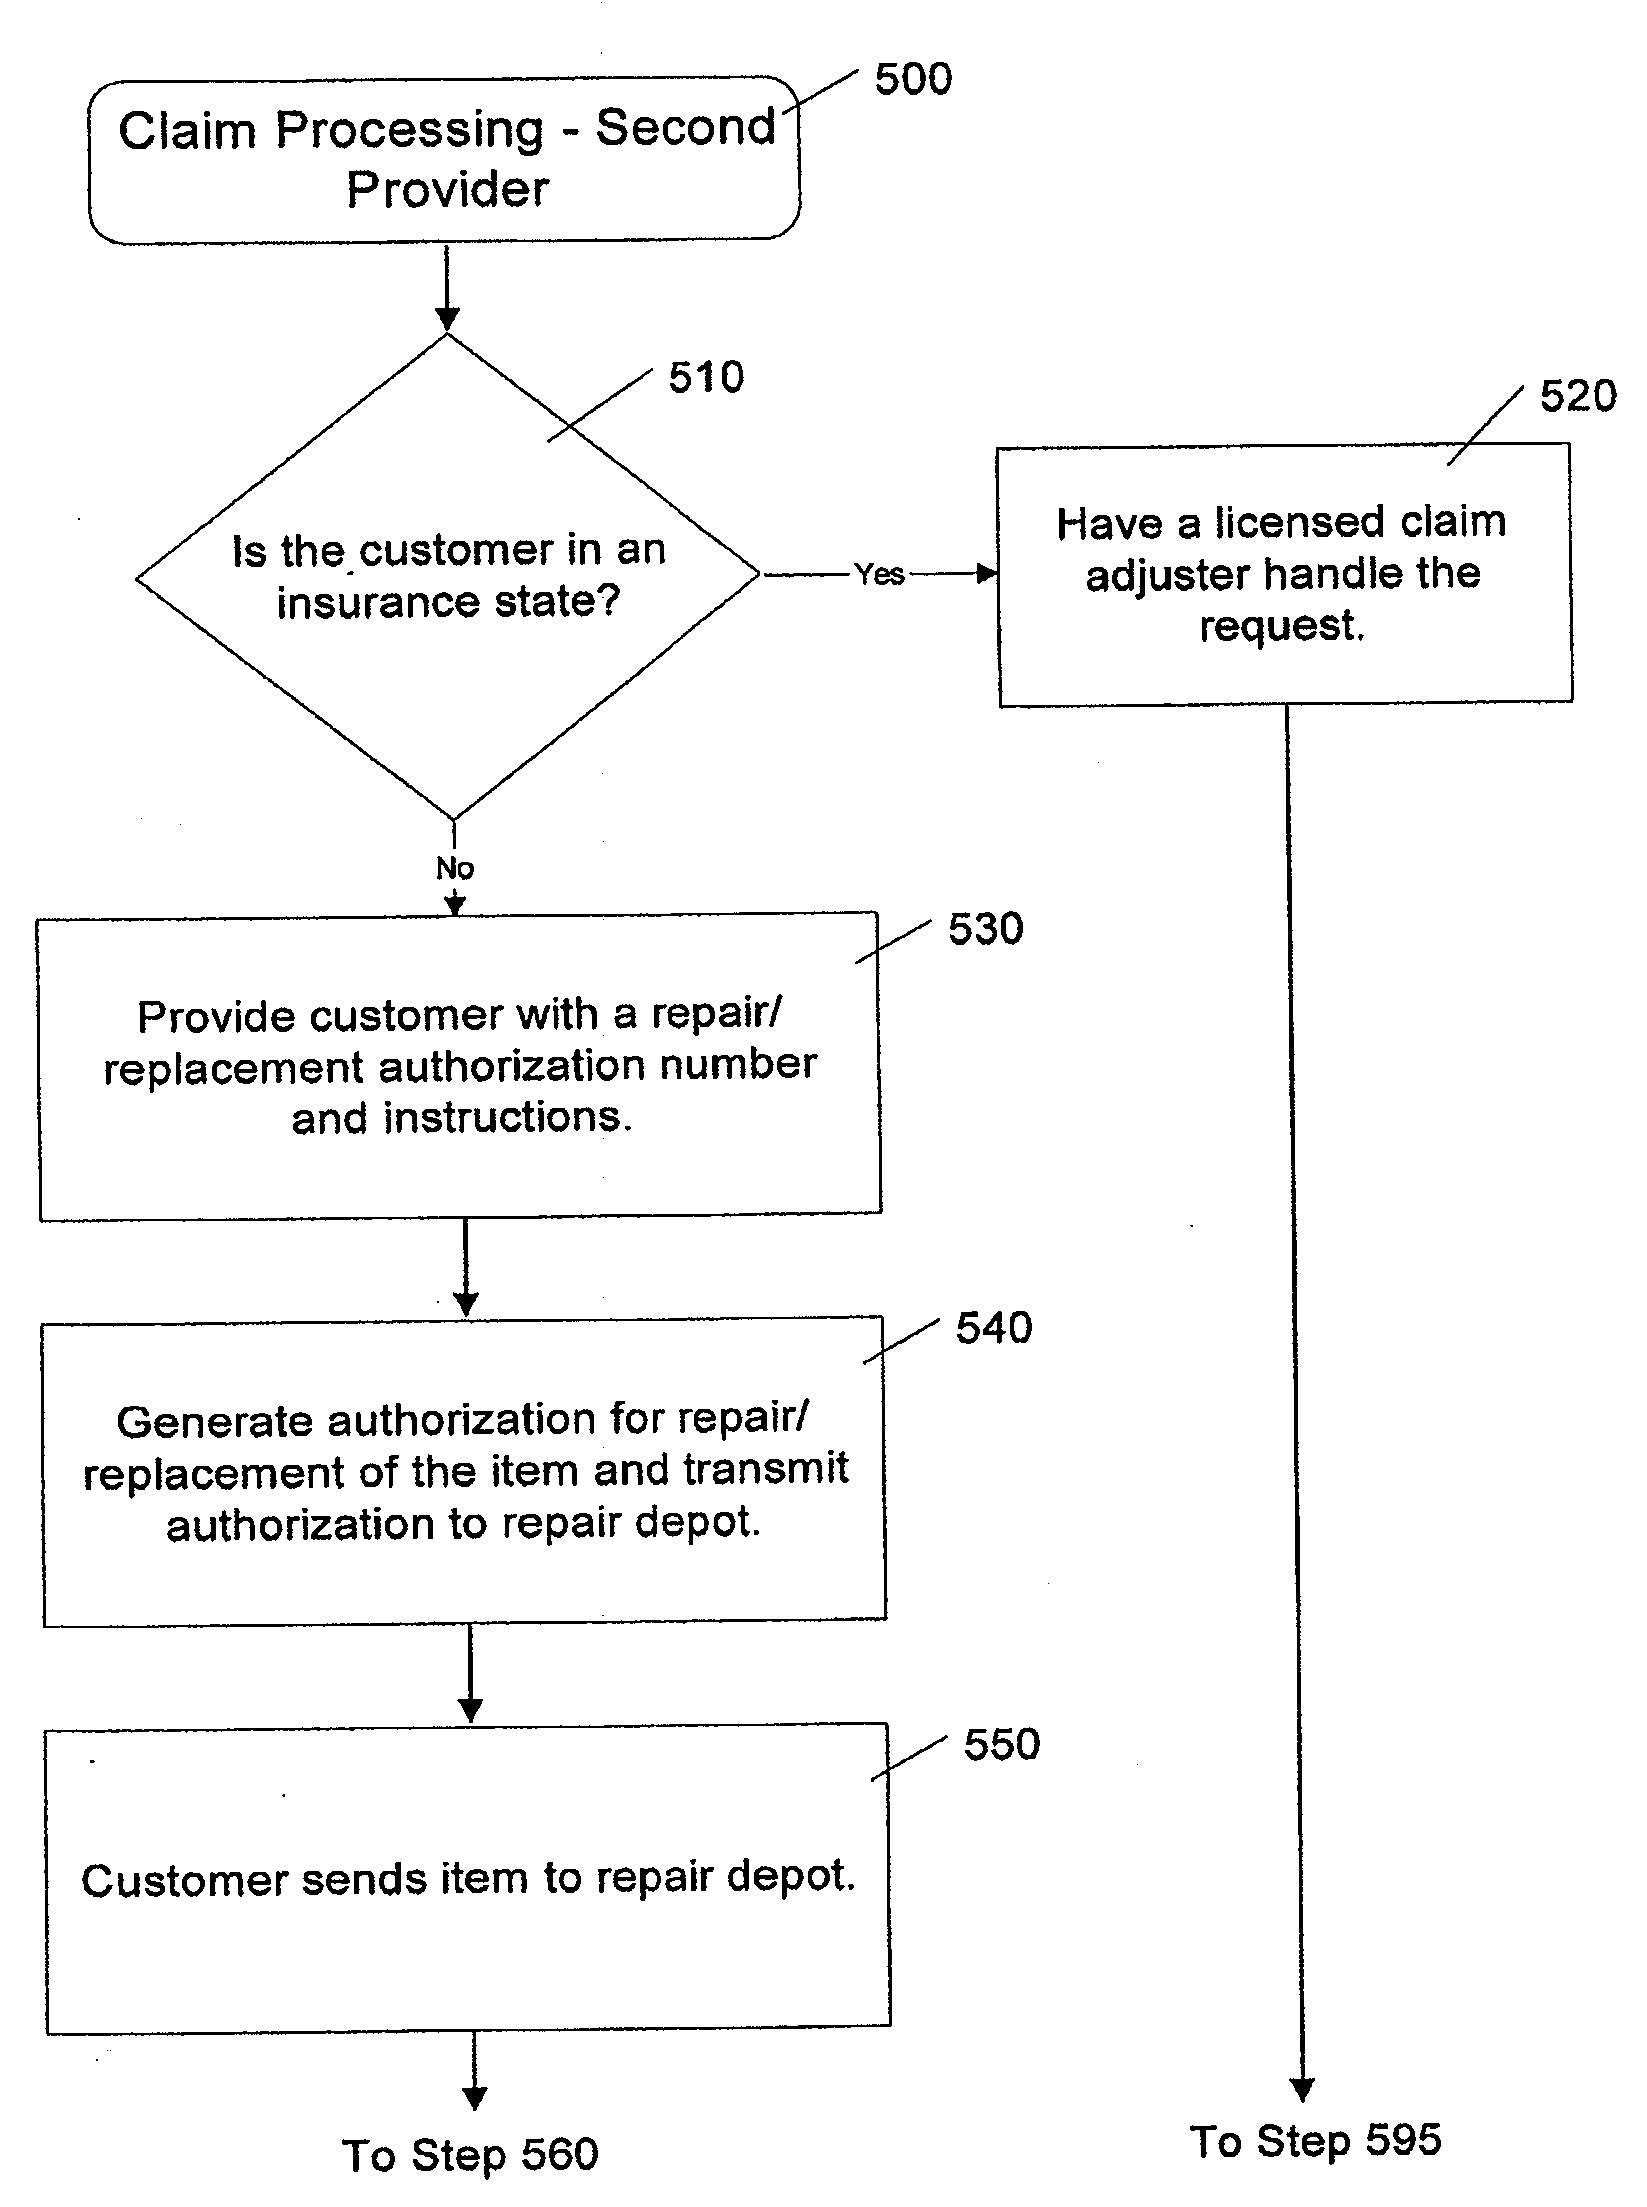 Systems and methods for providing insurance and non-insurance products